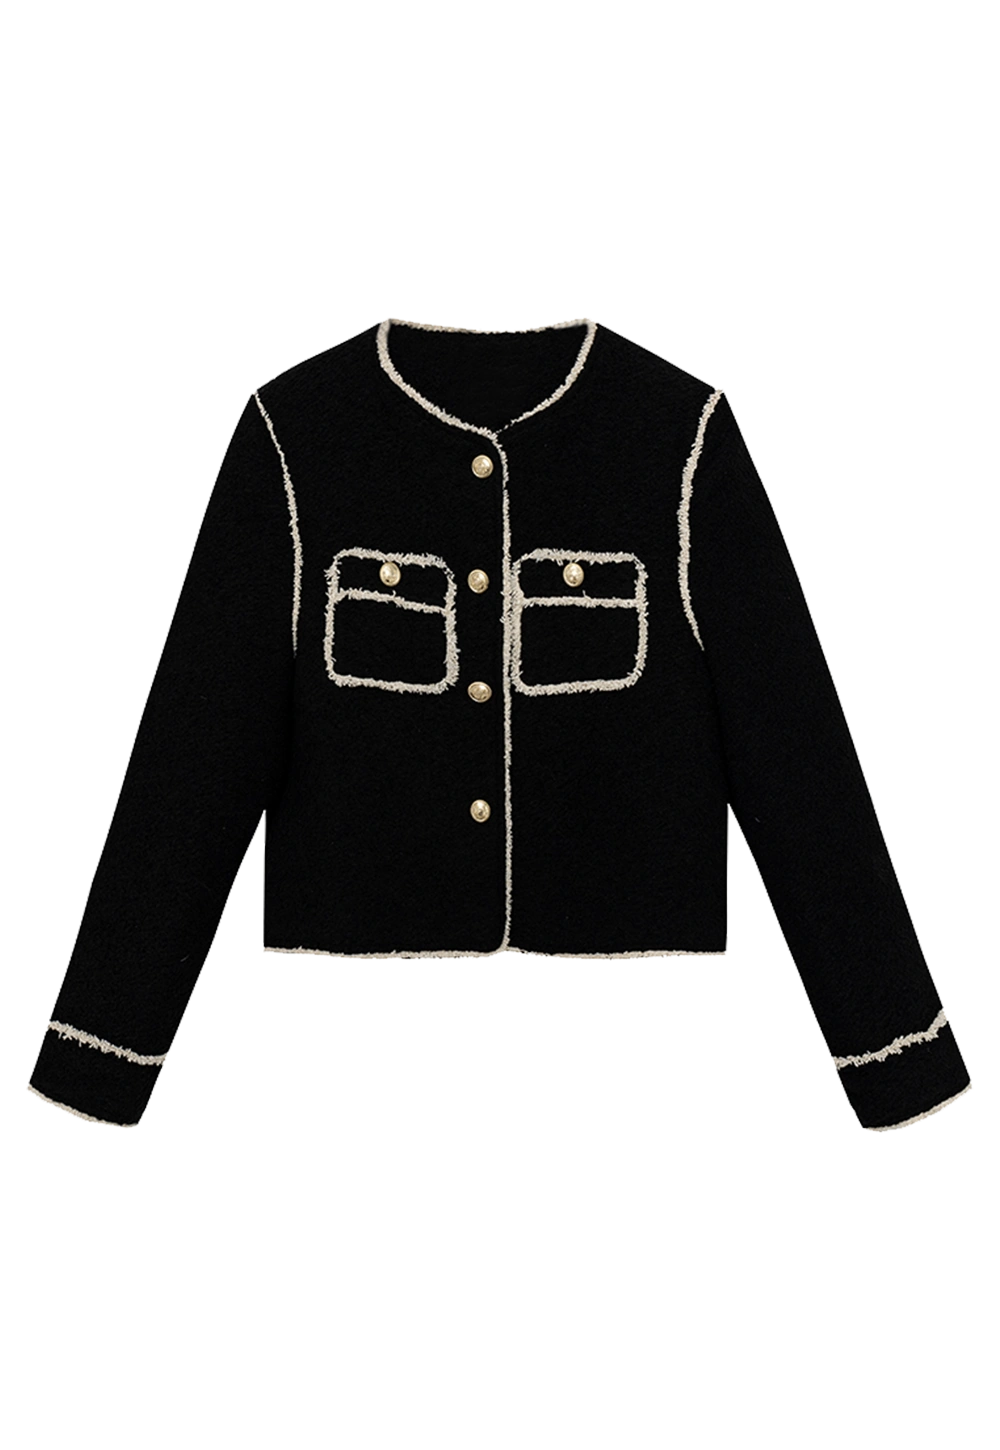 Women's Black and White Contrast Stitch Jacket with Gold Button Accents